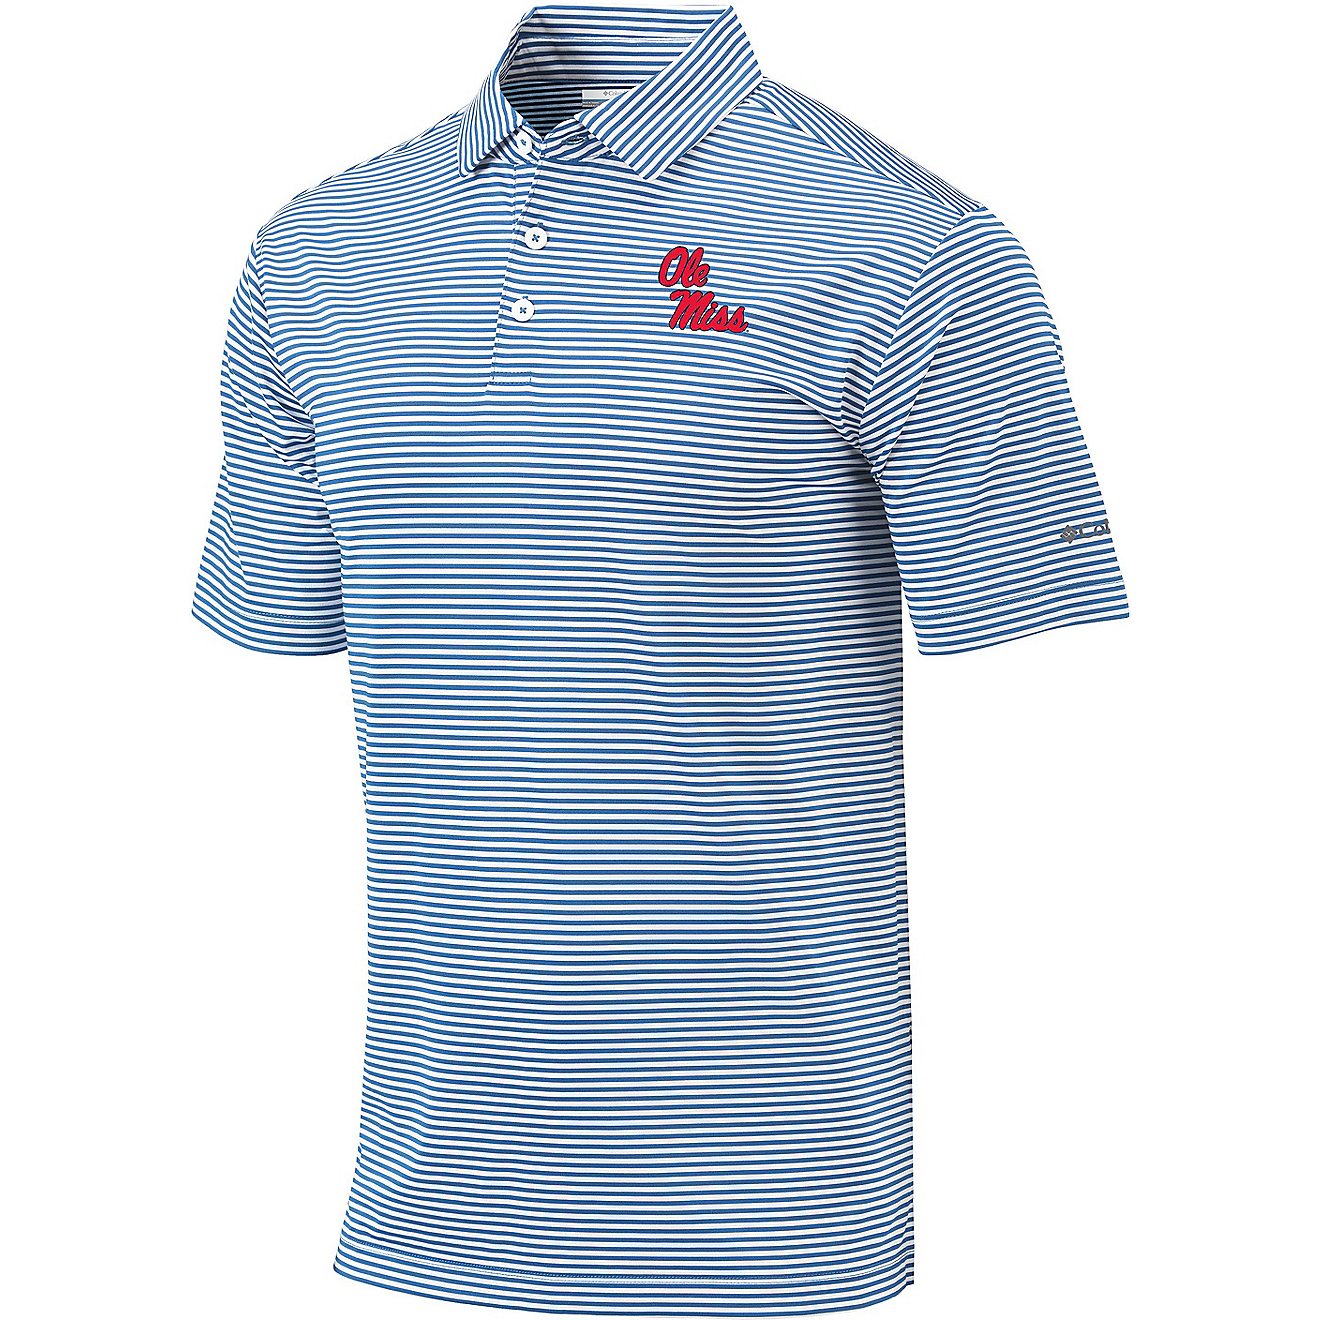  Columbia Sportswear Men's University of Mississippi Club Invite Polo Shirt                                                      - view number 1